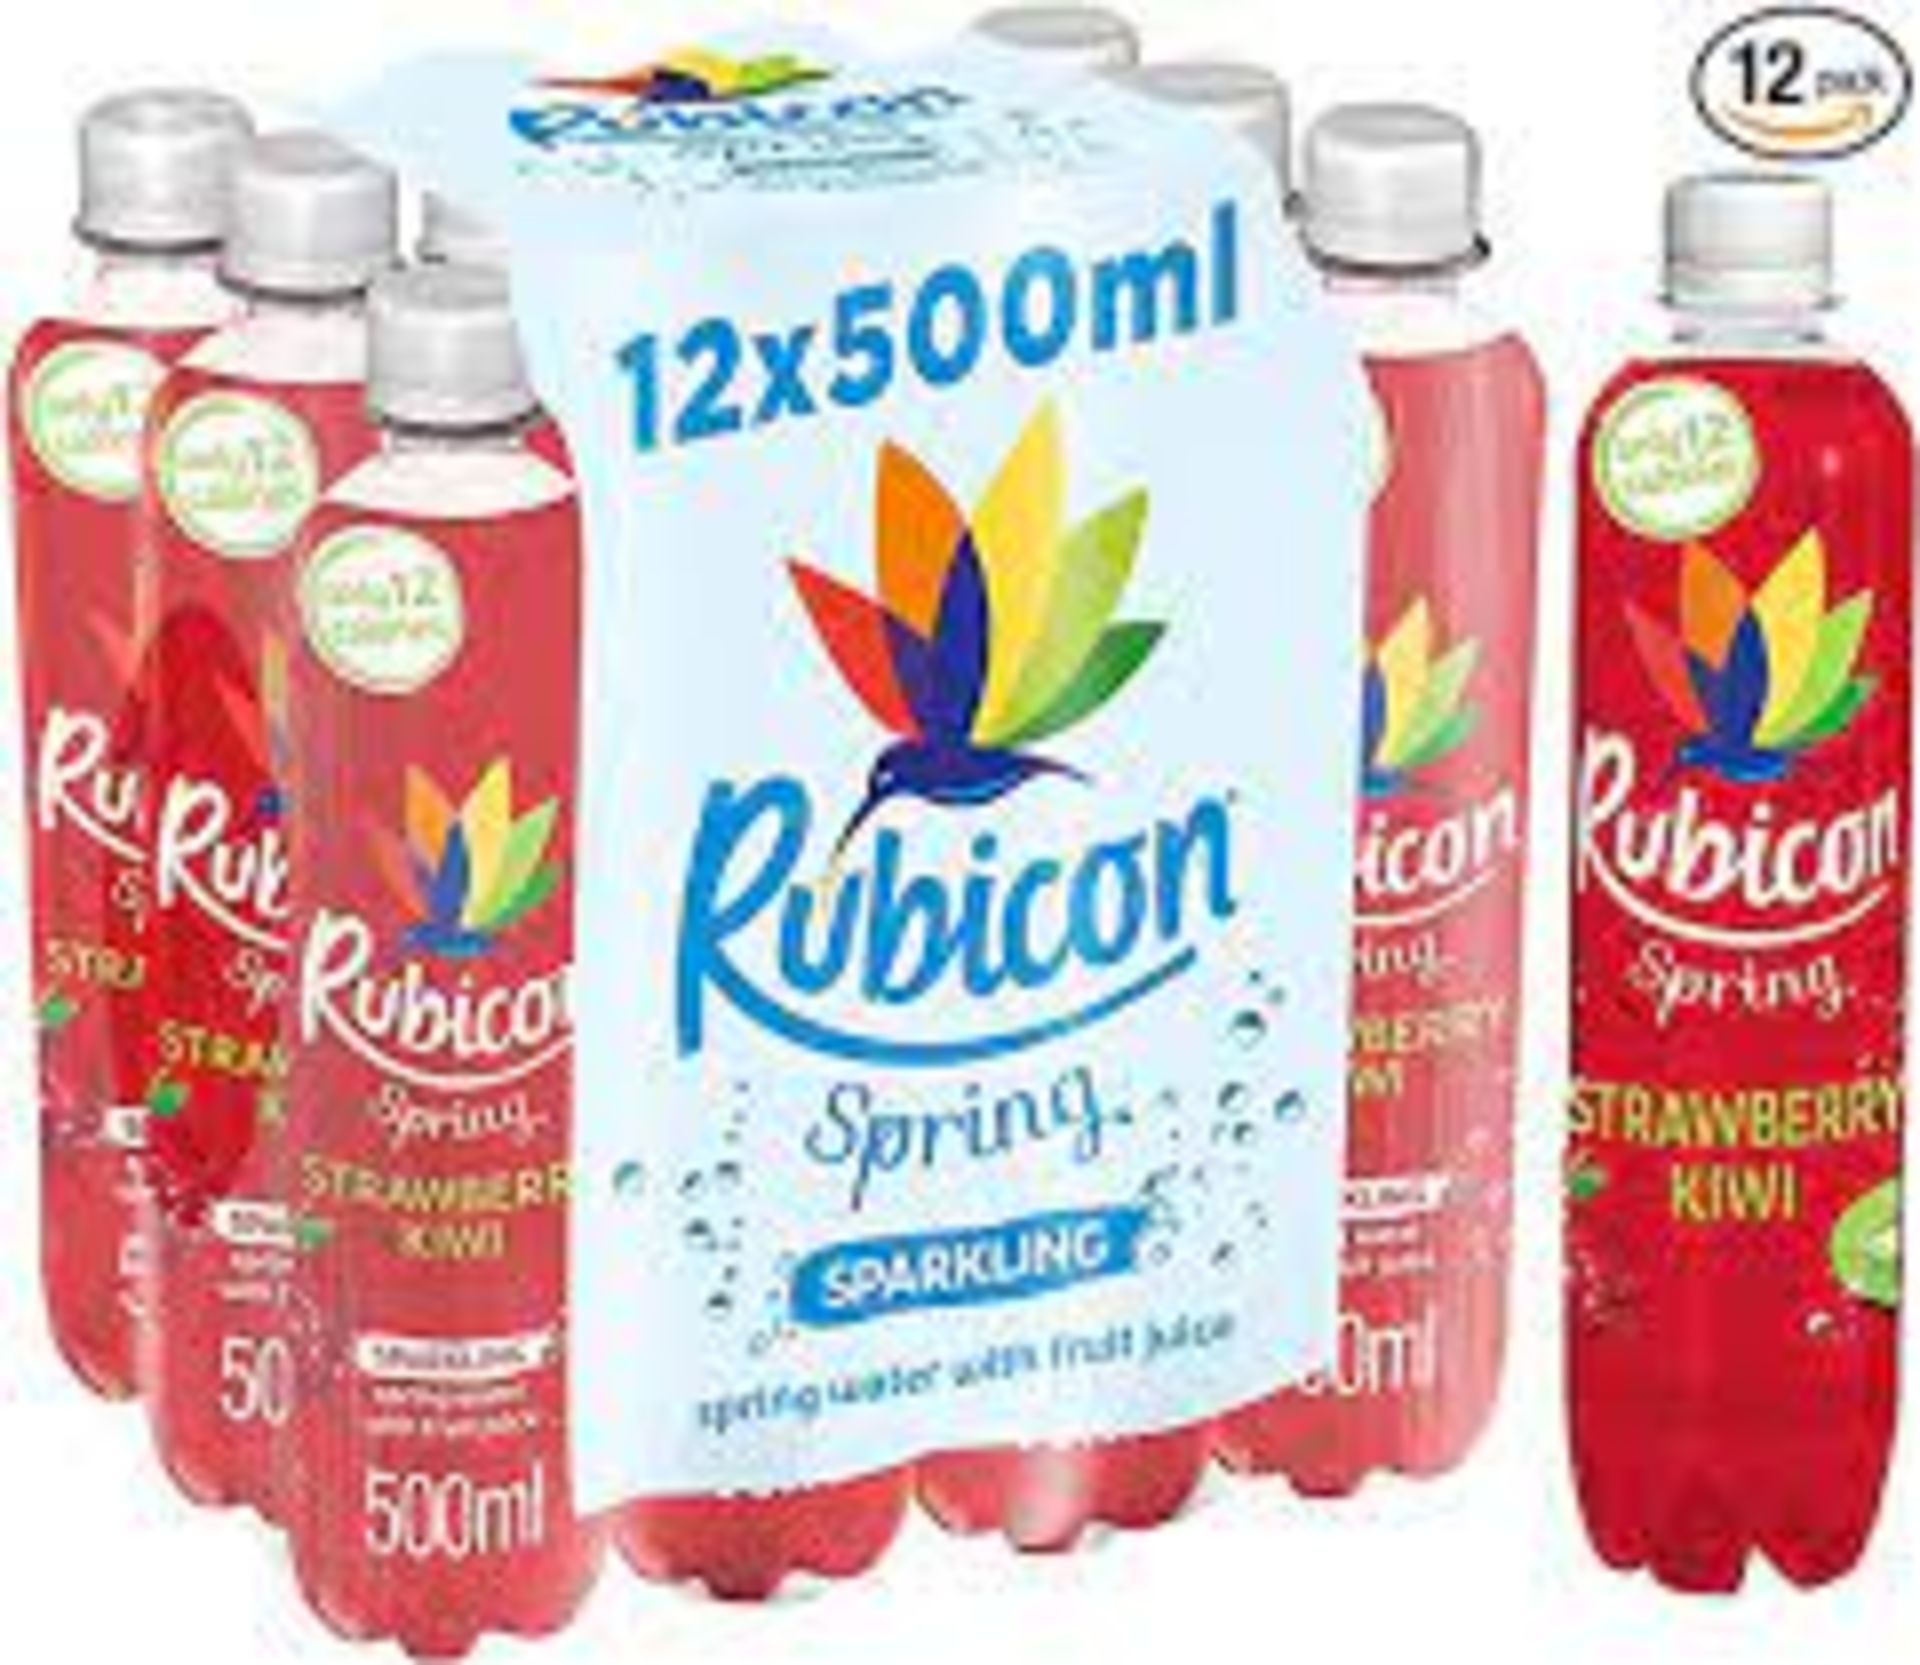 RRP £1601 (Count 95) Spw14U3445T Rubicon Spring, Sparkling Spring Water With Real Fruit Juice &